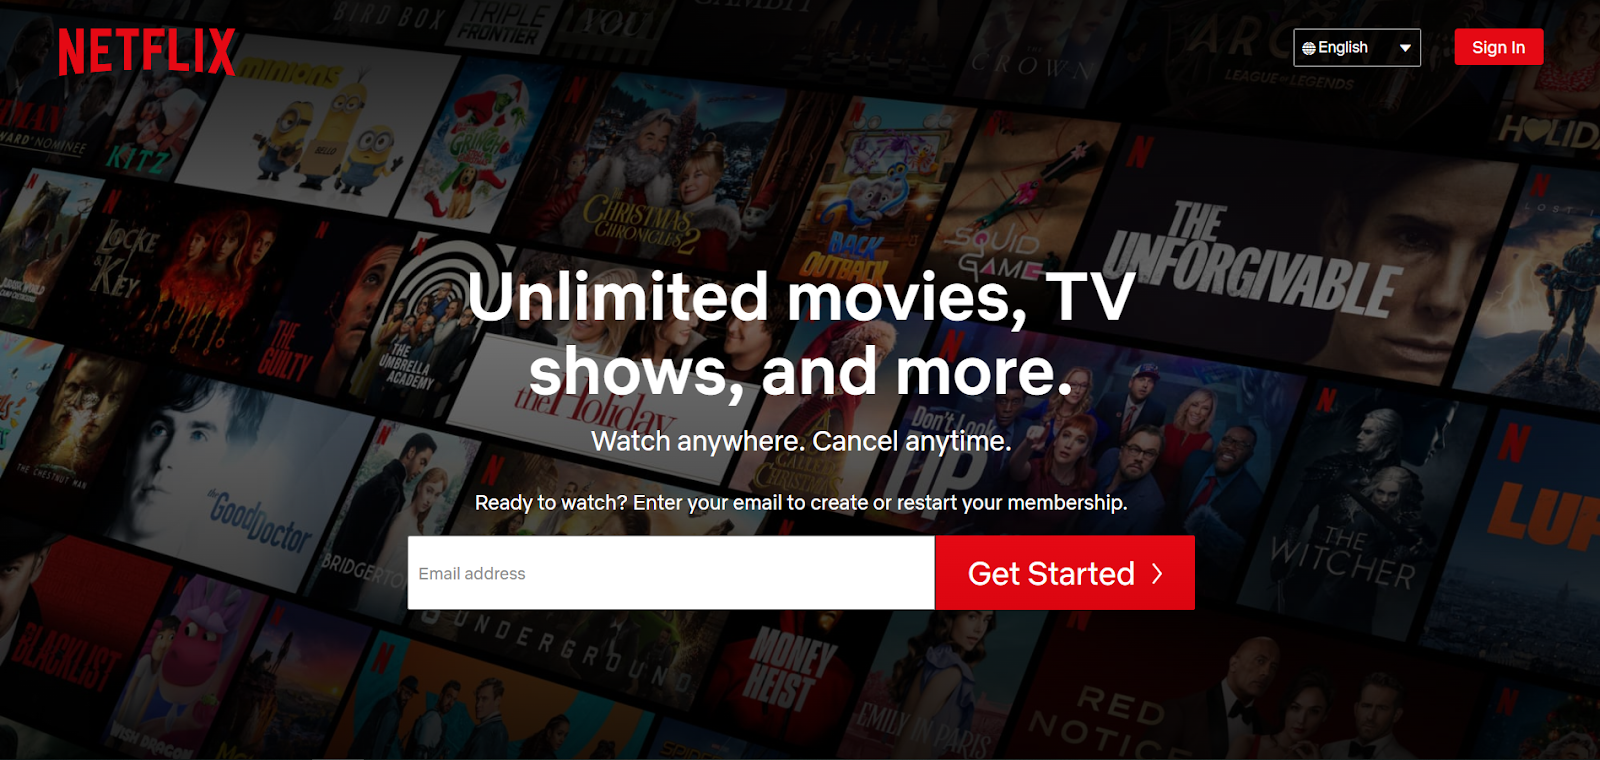 Netflix sign in page